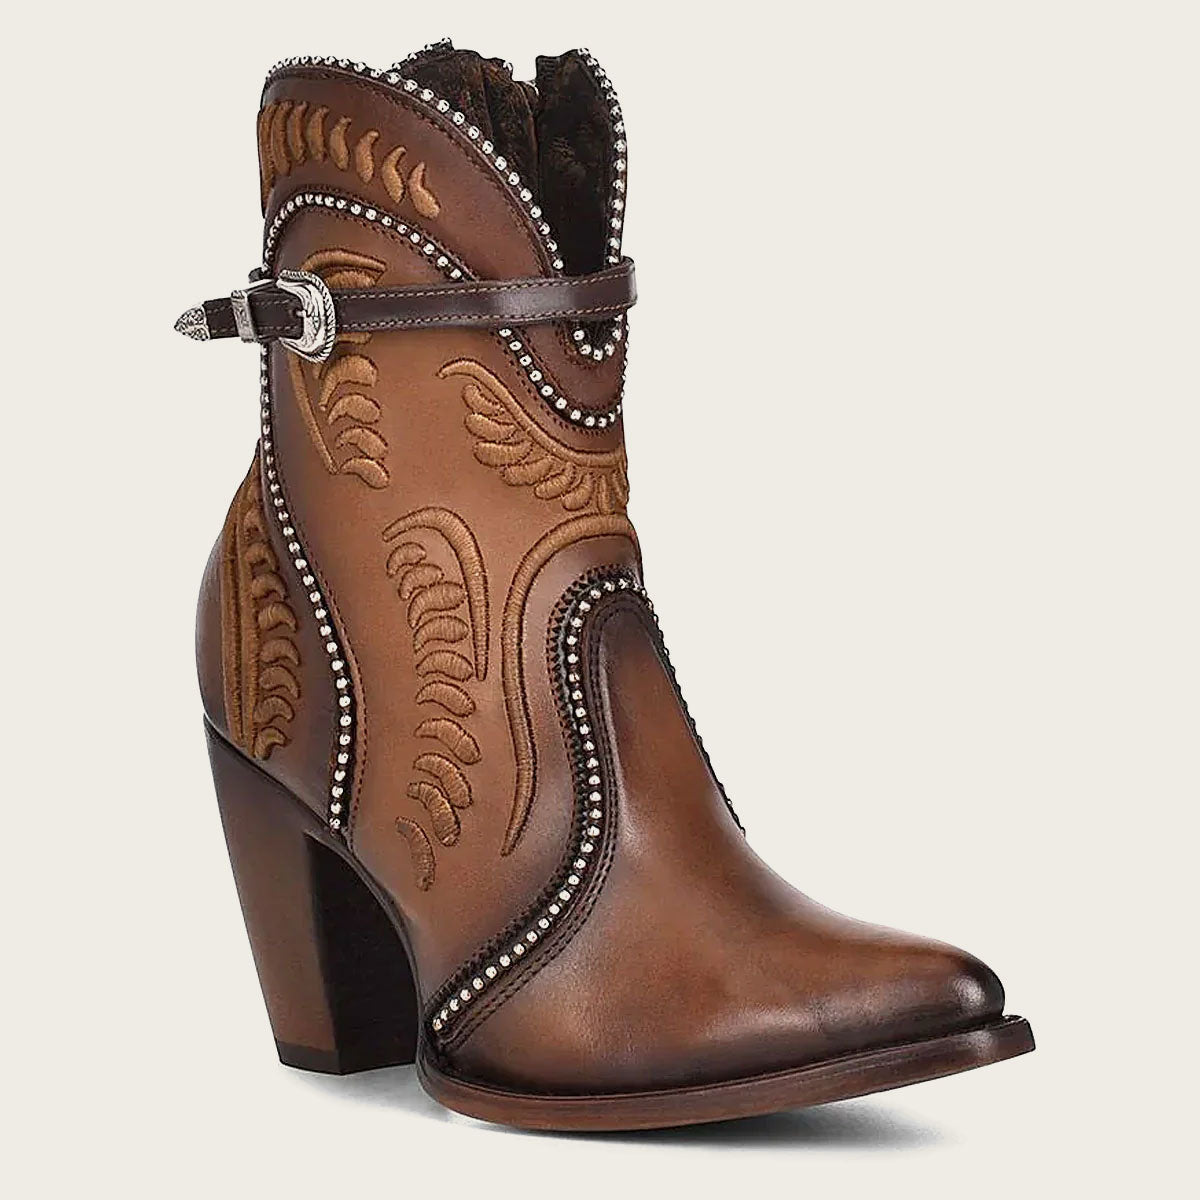 Step into sophistication with our exquisite women's embroidered honey leather western bootie.